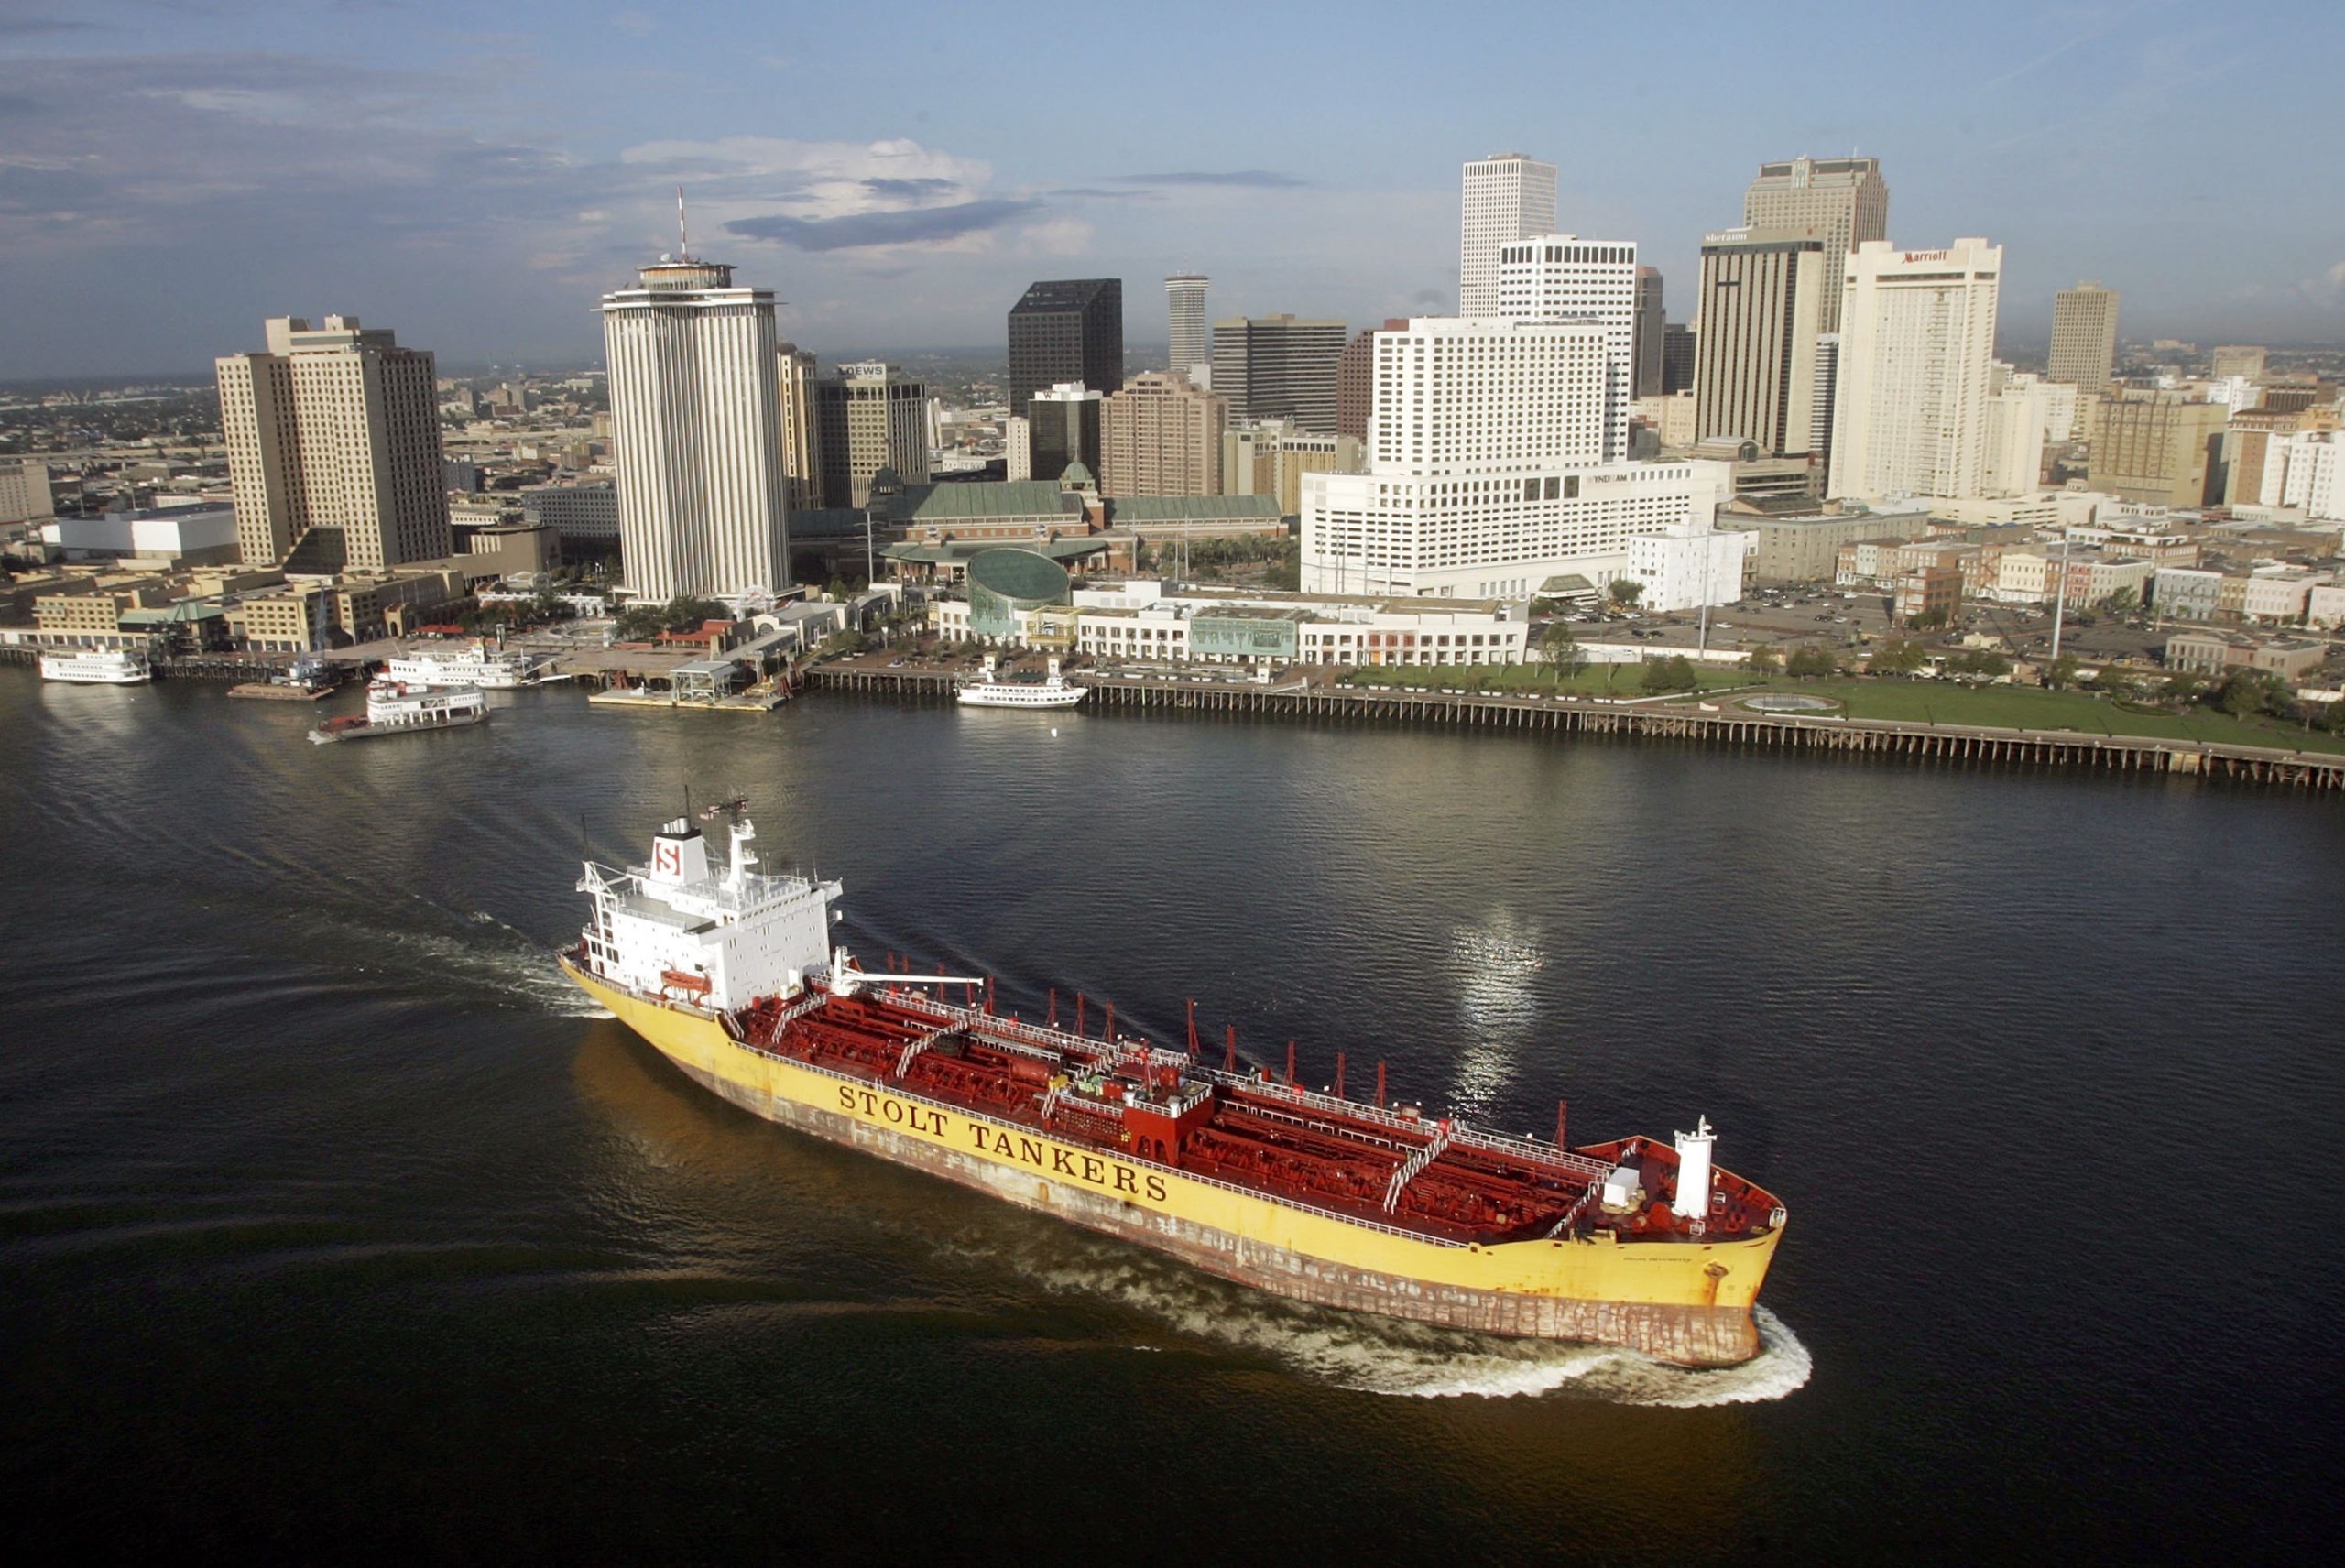 NEW ORLEANS - AUGUST 25:  A container ship moves along the Mississippi River with the city skyline in the background August 25, 2006 in New Orleans, Louisiana. The first anniversary of Hurricane Katrina is August 29.  (Photo by Mario Tama/Getty Images)